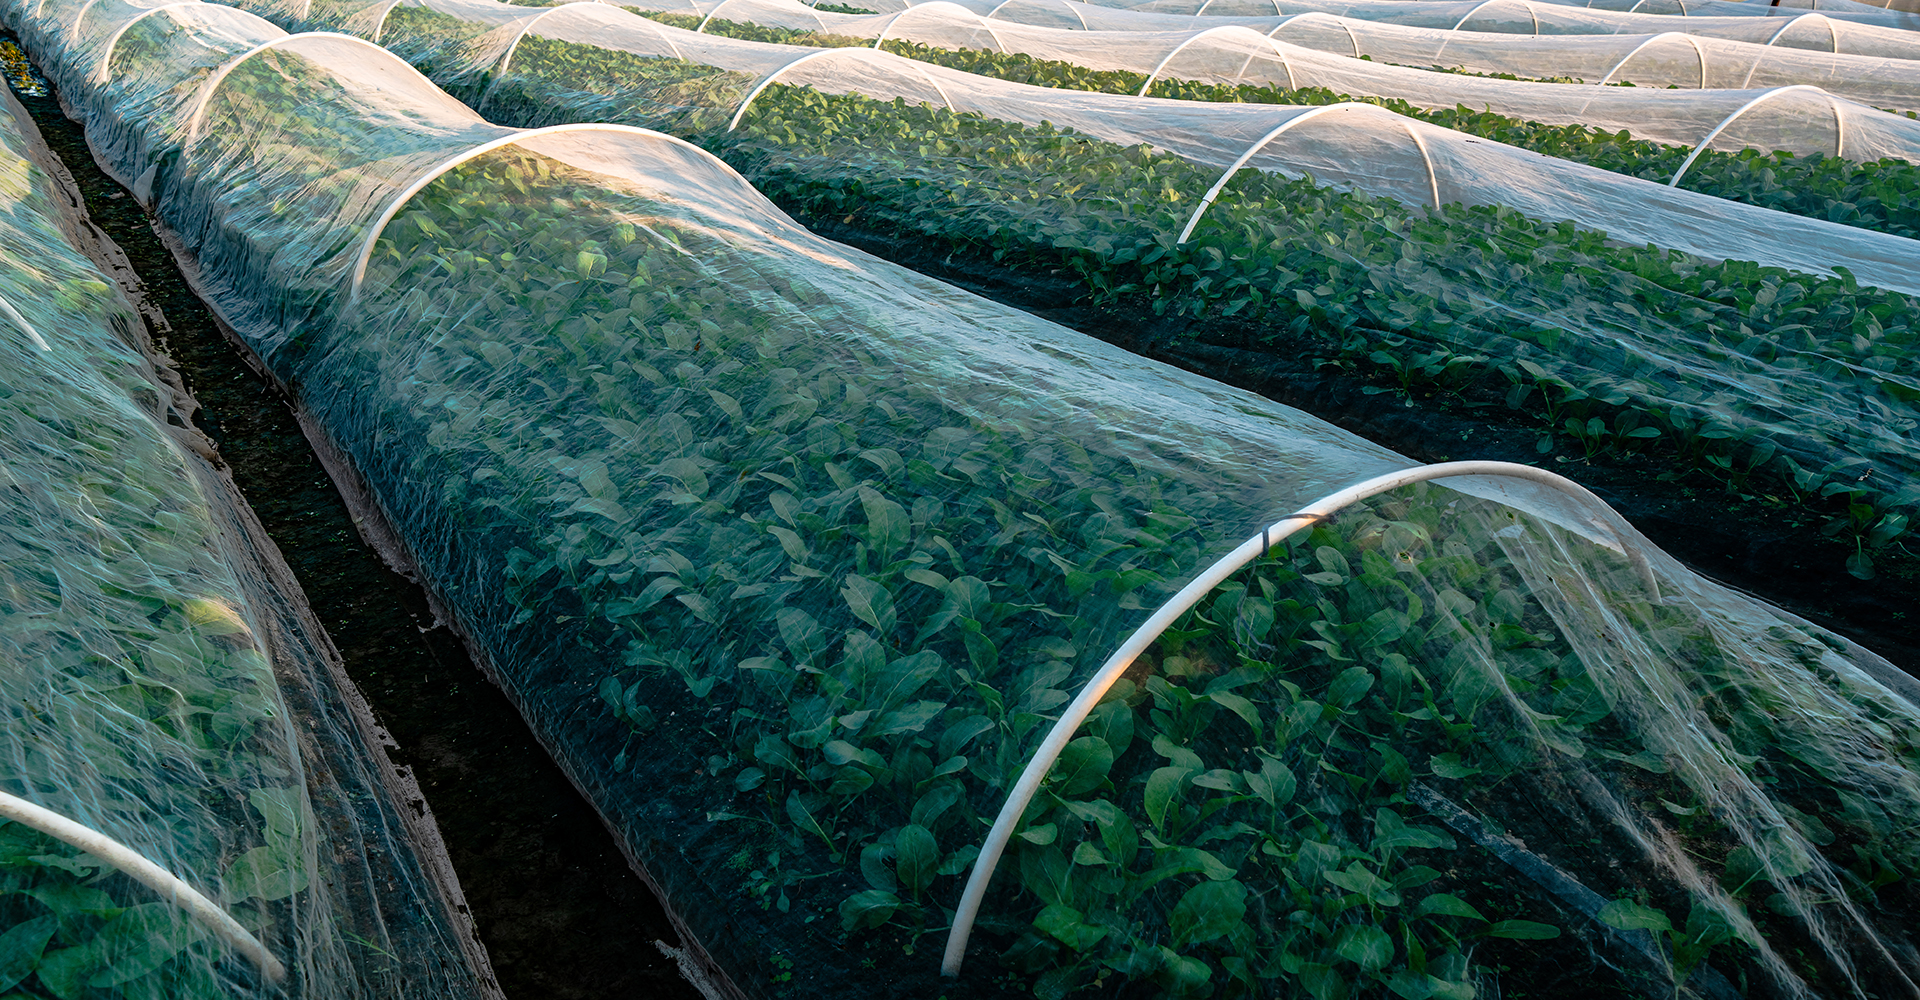 Agriculturally grown plants under a protective film